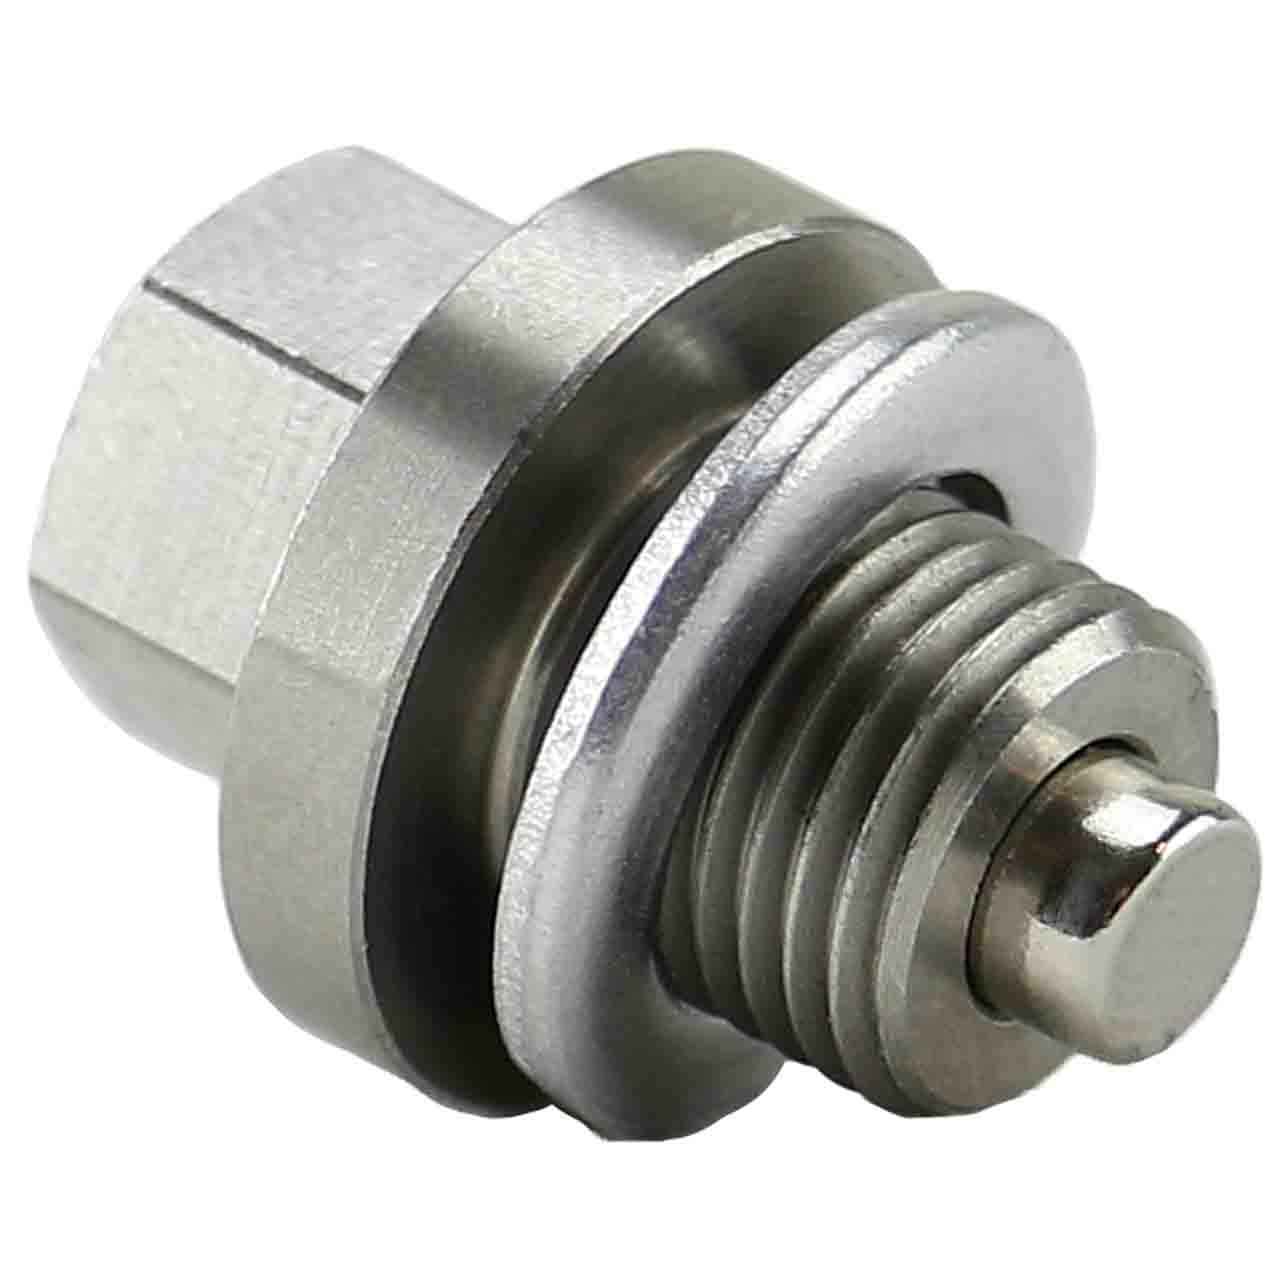 Stainless Steel AUTOMATIC TRANSMISSION Oil Drain Plug with Neodymium Magnet - MADE IN USA